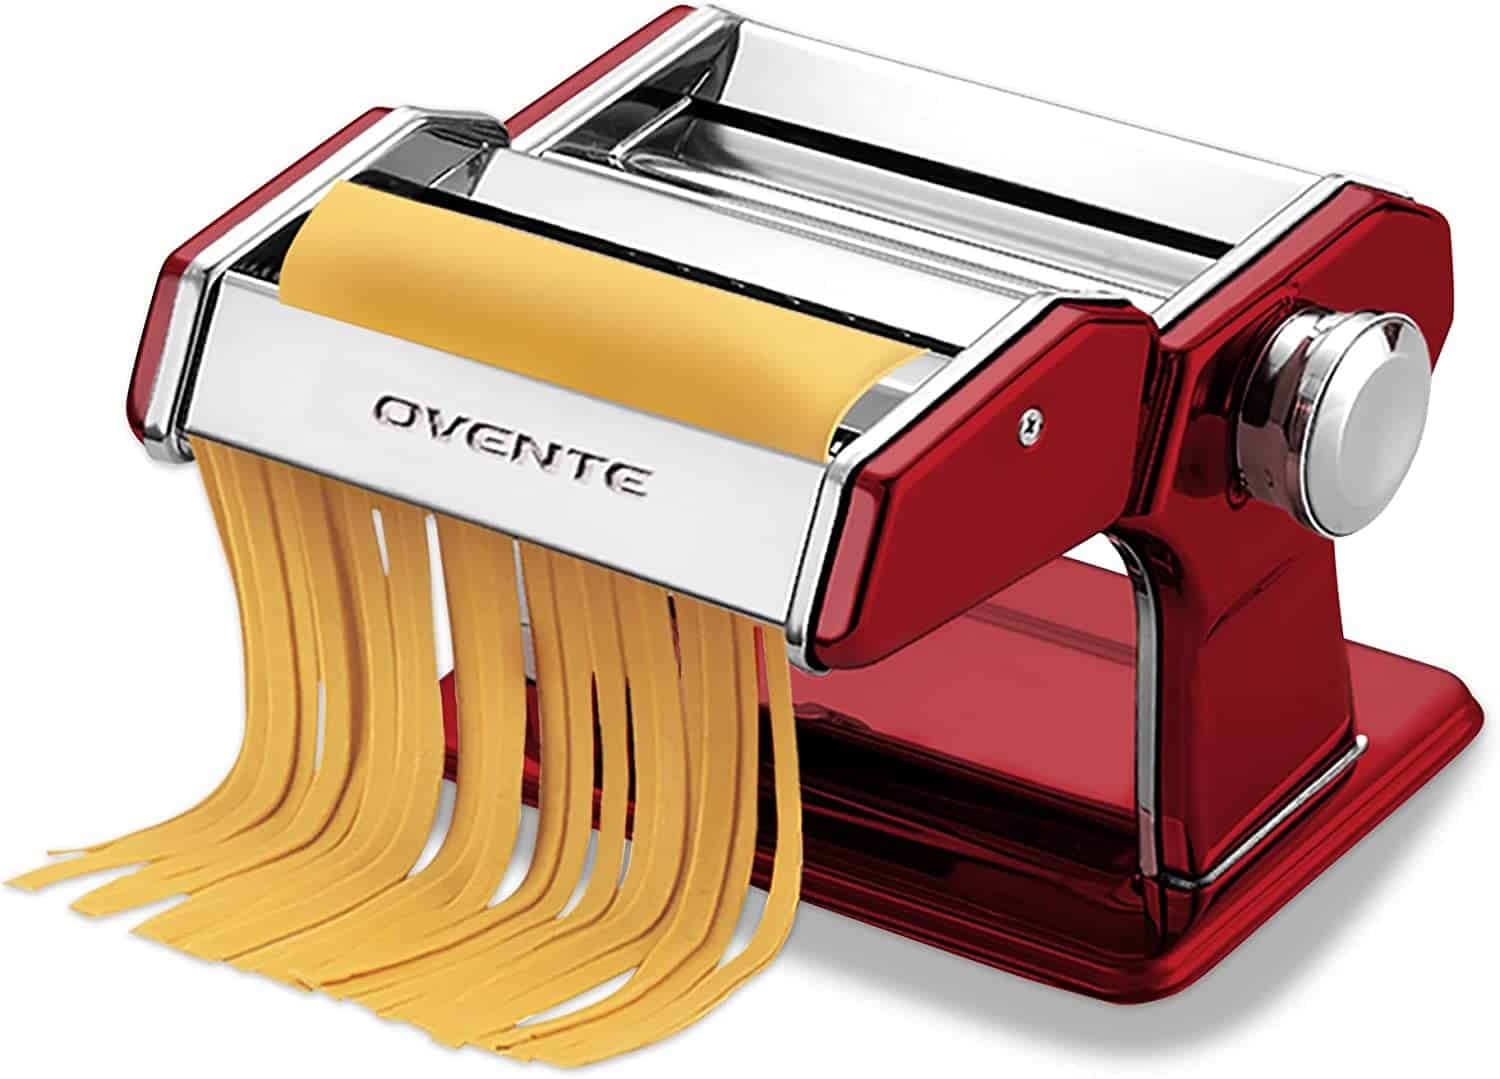 Ovente Manual Stainless Steel Pasta Maker
